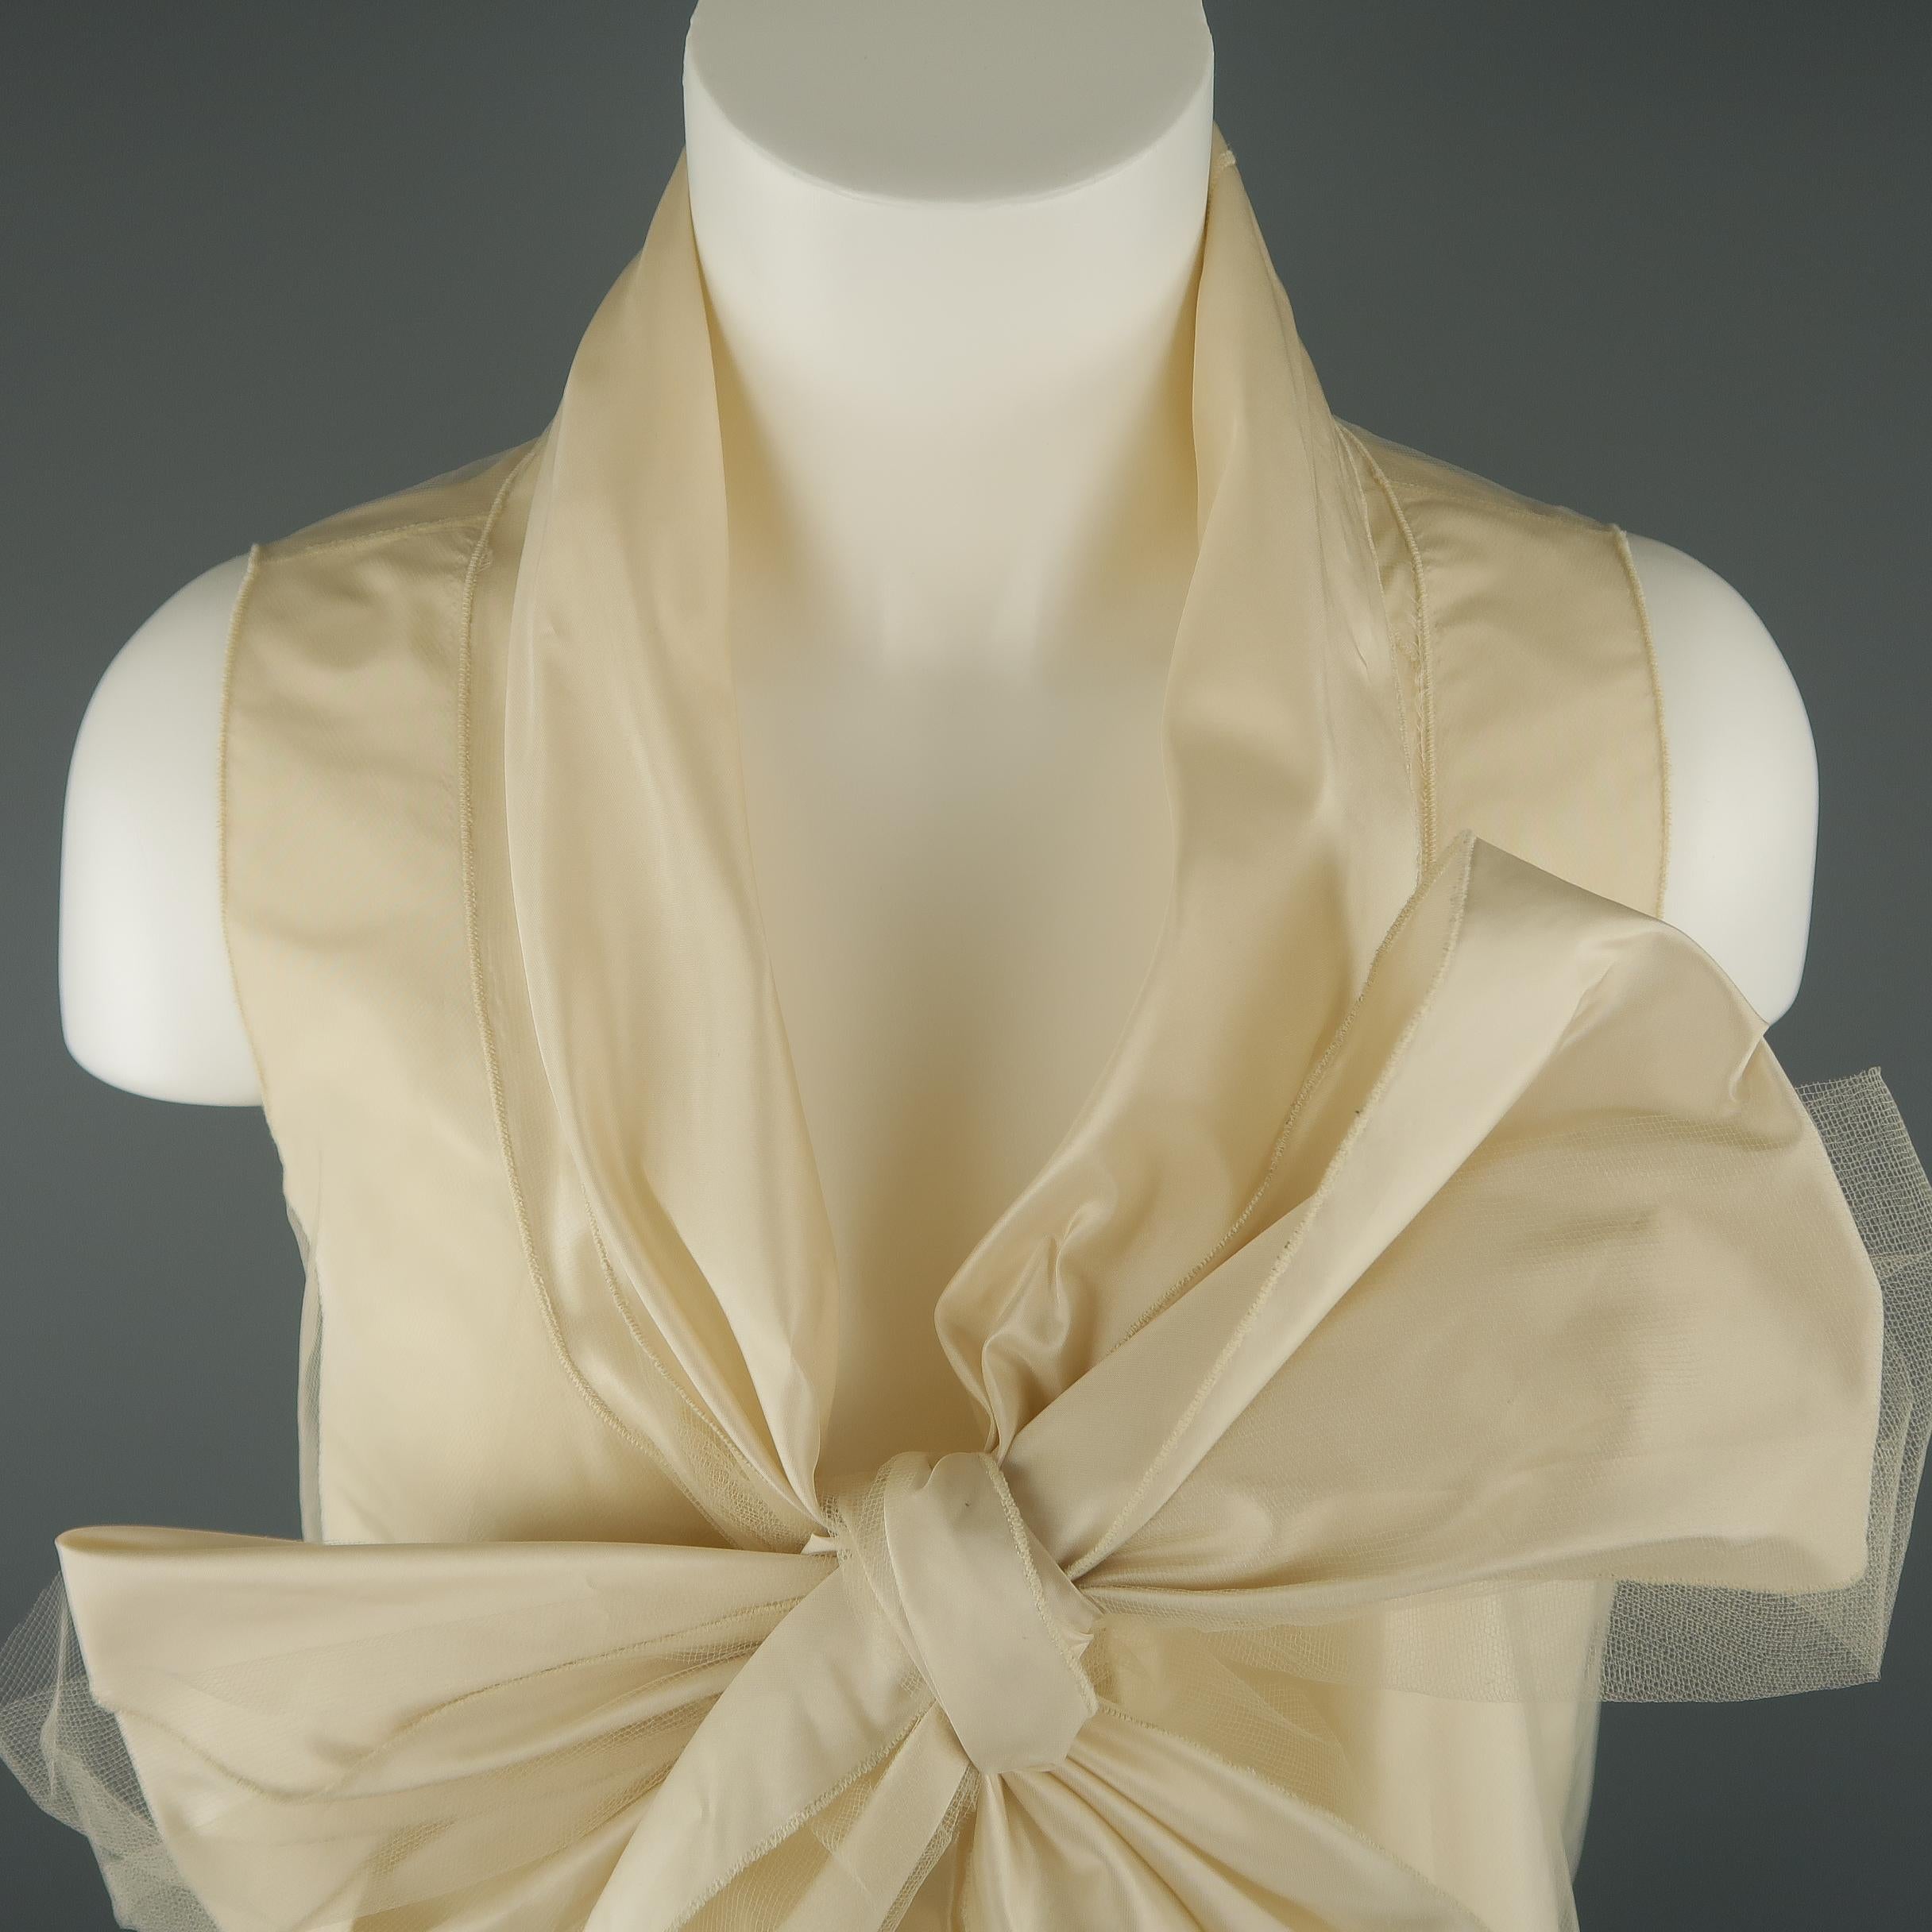 OSCAR DE LA RENTA sleeveless blouse comes in silk taffeta and features an A line body with tulle overlay, lace trim, and shawl collar with oversized bow tie front. Discolorations shown in detail shots. As-is. Circa Spring 2006. Made in USA.
 
Good